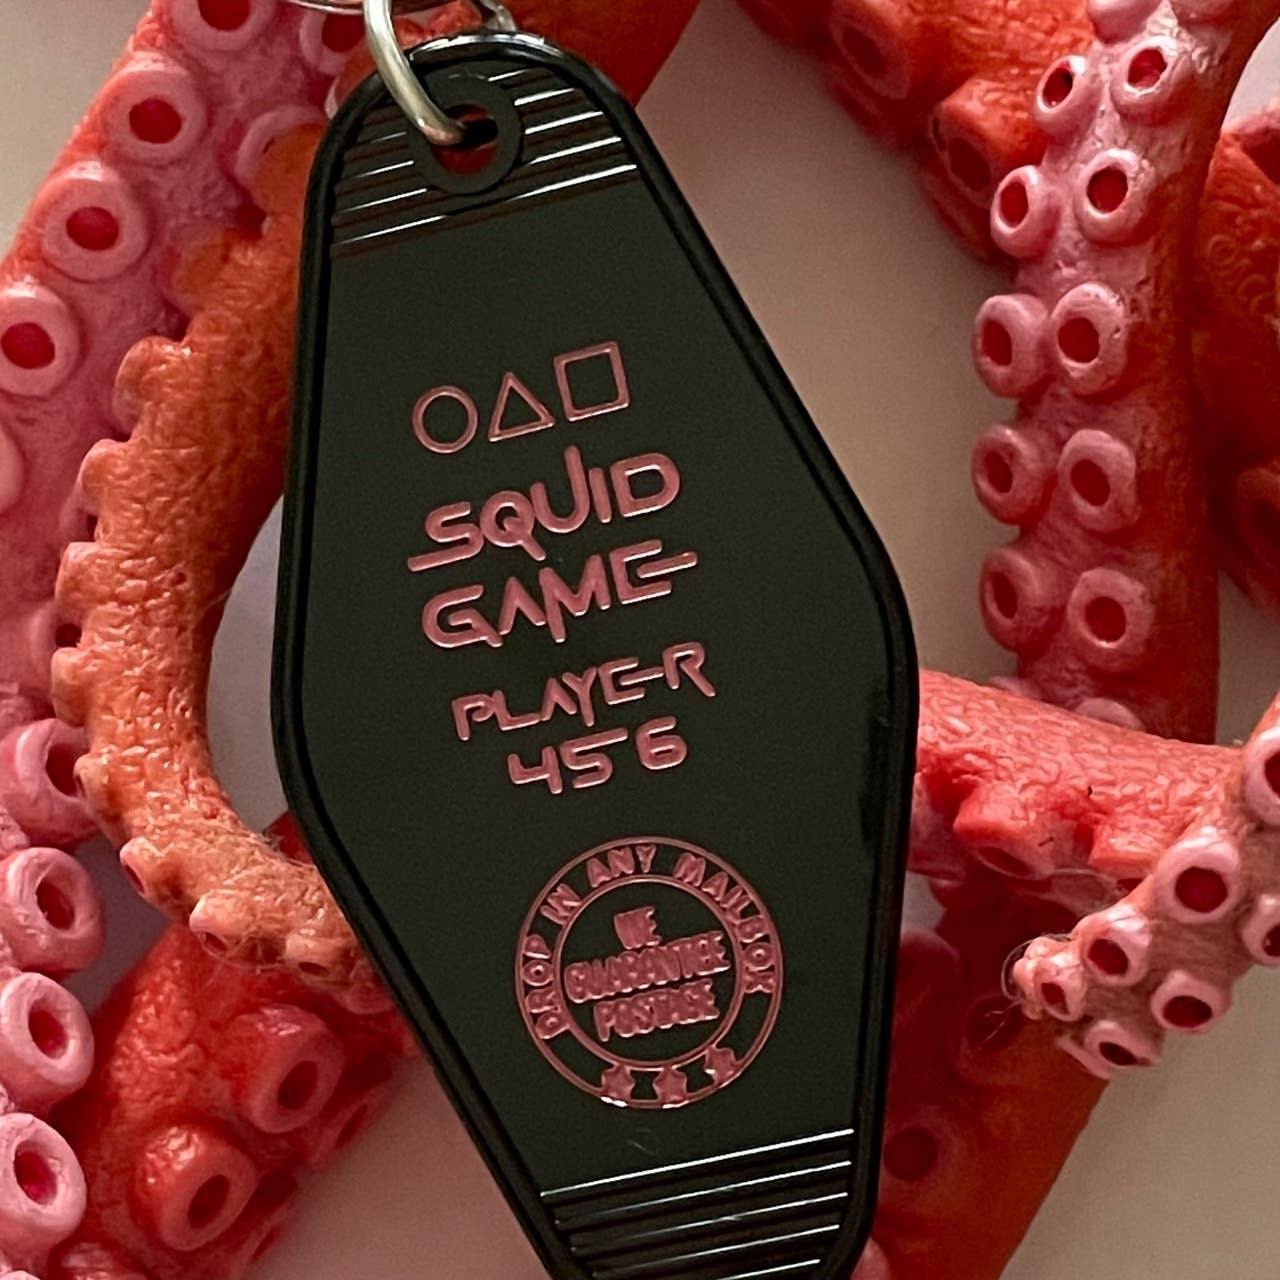 The 3 Sisters Design Co. - Motel Key Fob - Squid Game, Player 456